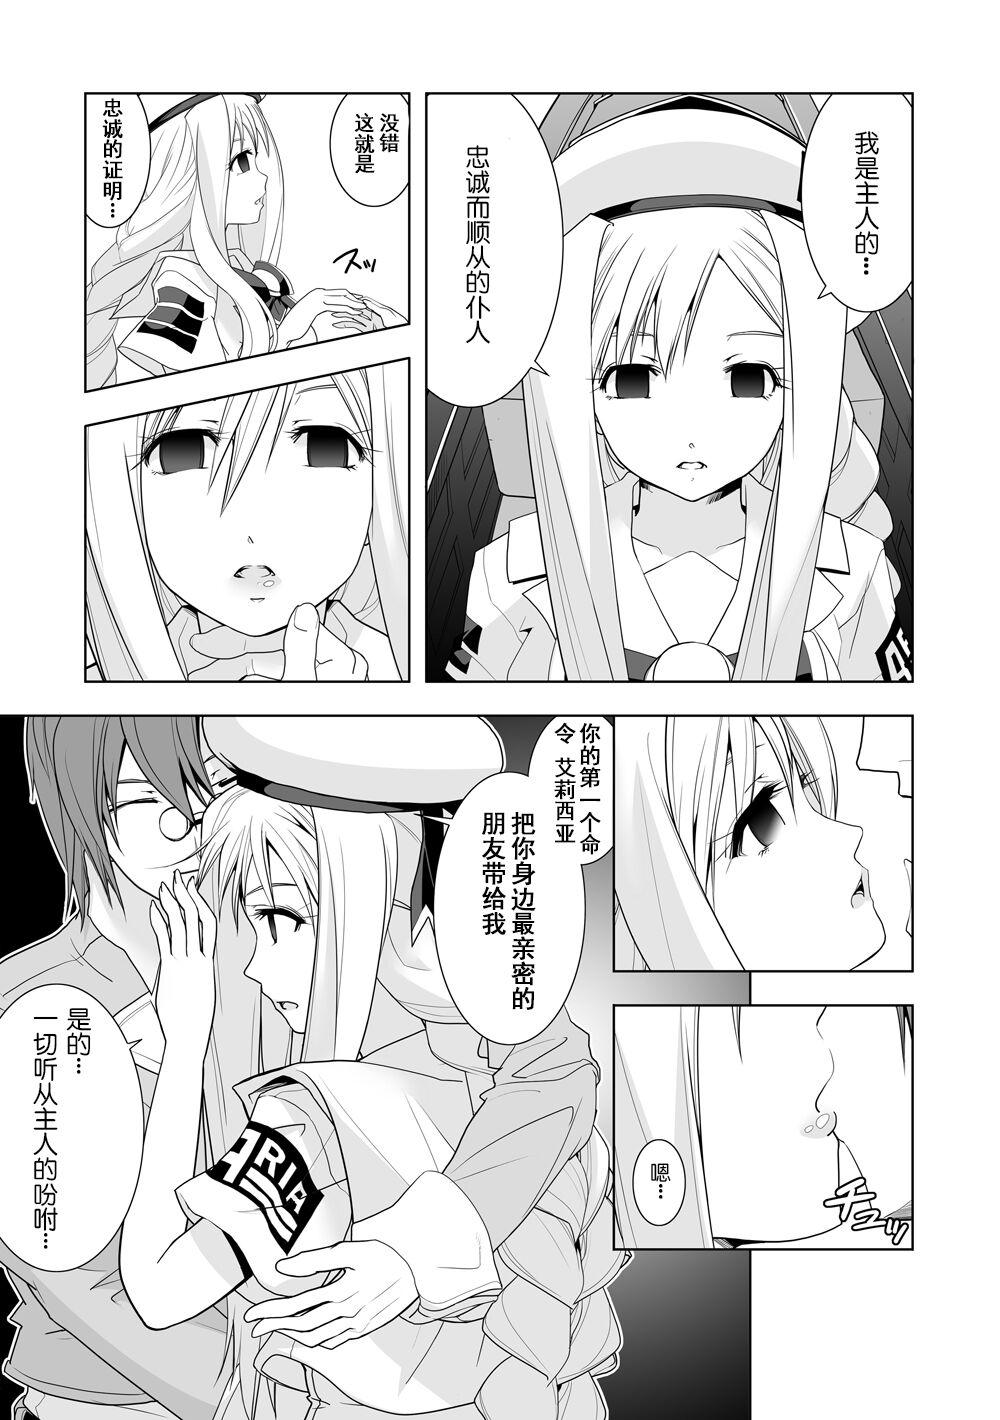 Pussyeating AR*A Mind-control Manga - Aria Mofos - Picture 3